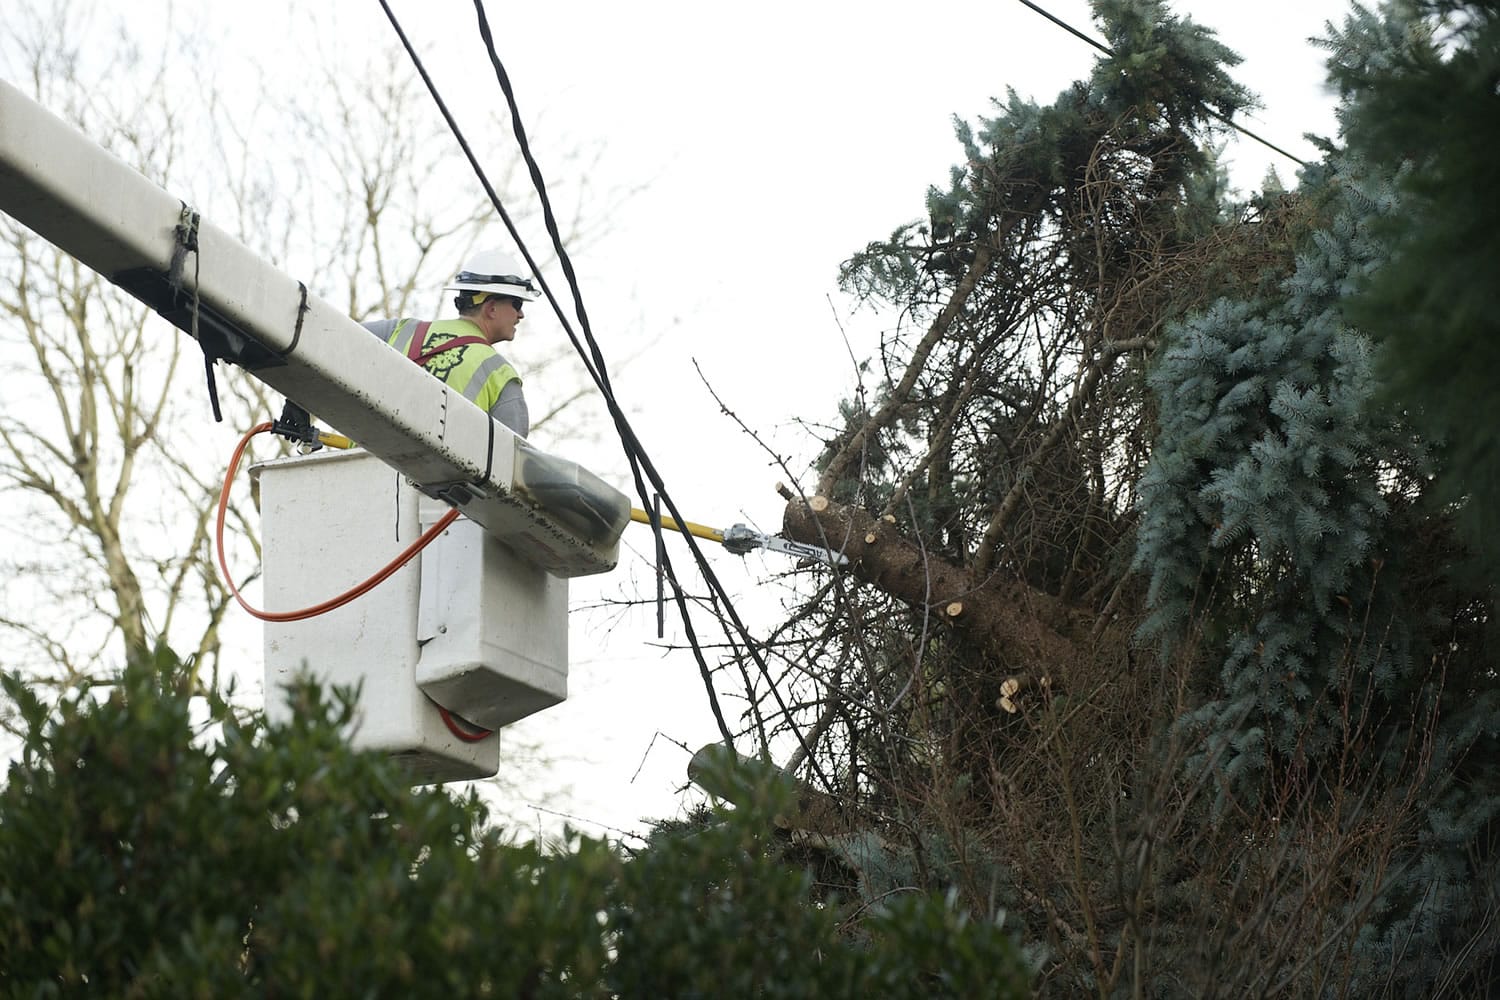 A crew from Wright Tree Service clears branches from power lines near the intersection of Santa Fe Drive and New Mexico Street in Vancouver as cleanup continued from Thursday's windstorm.